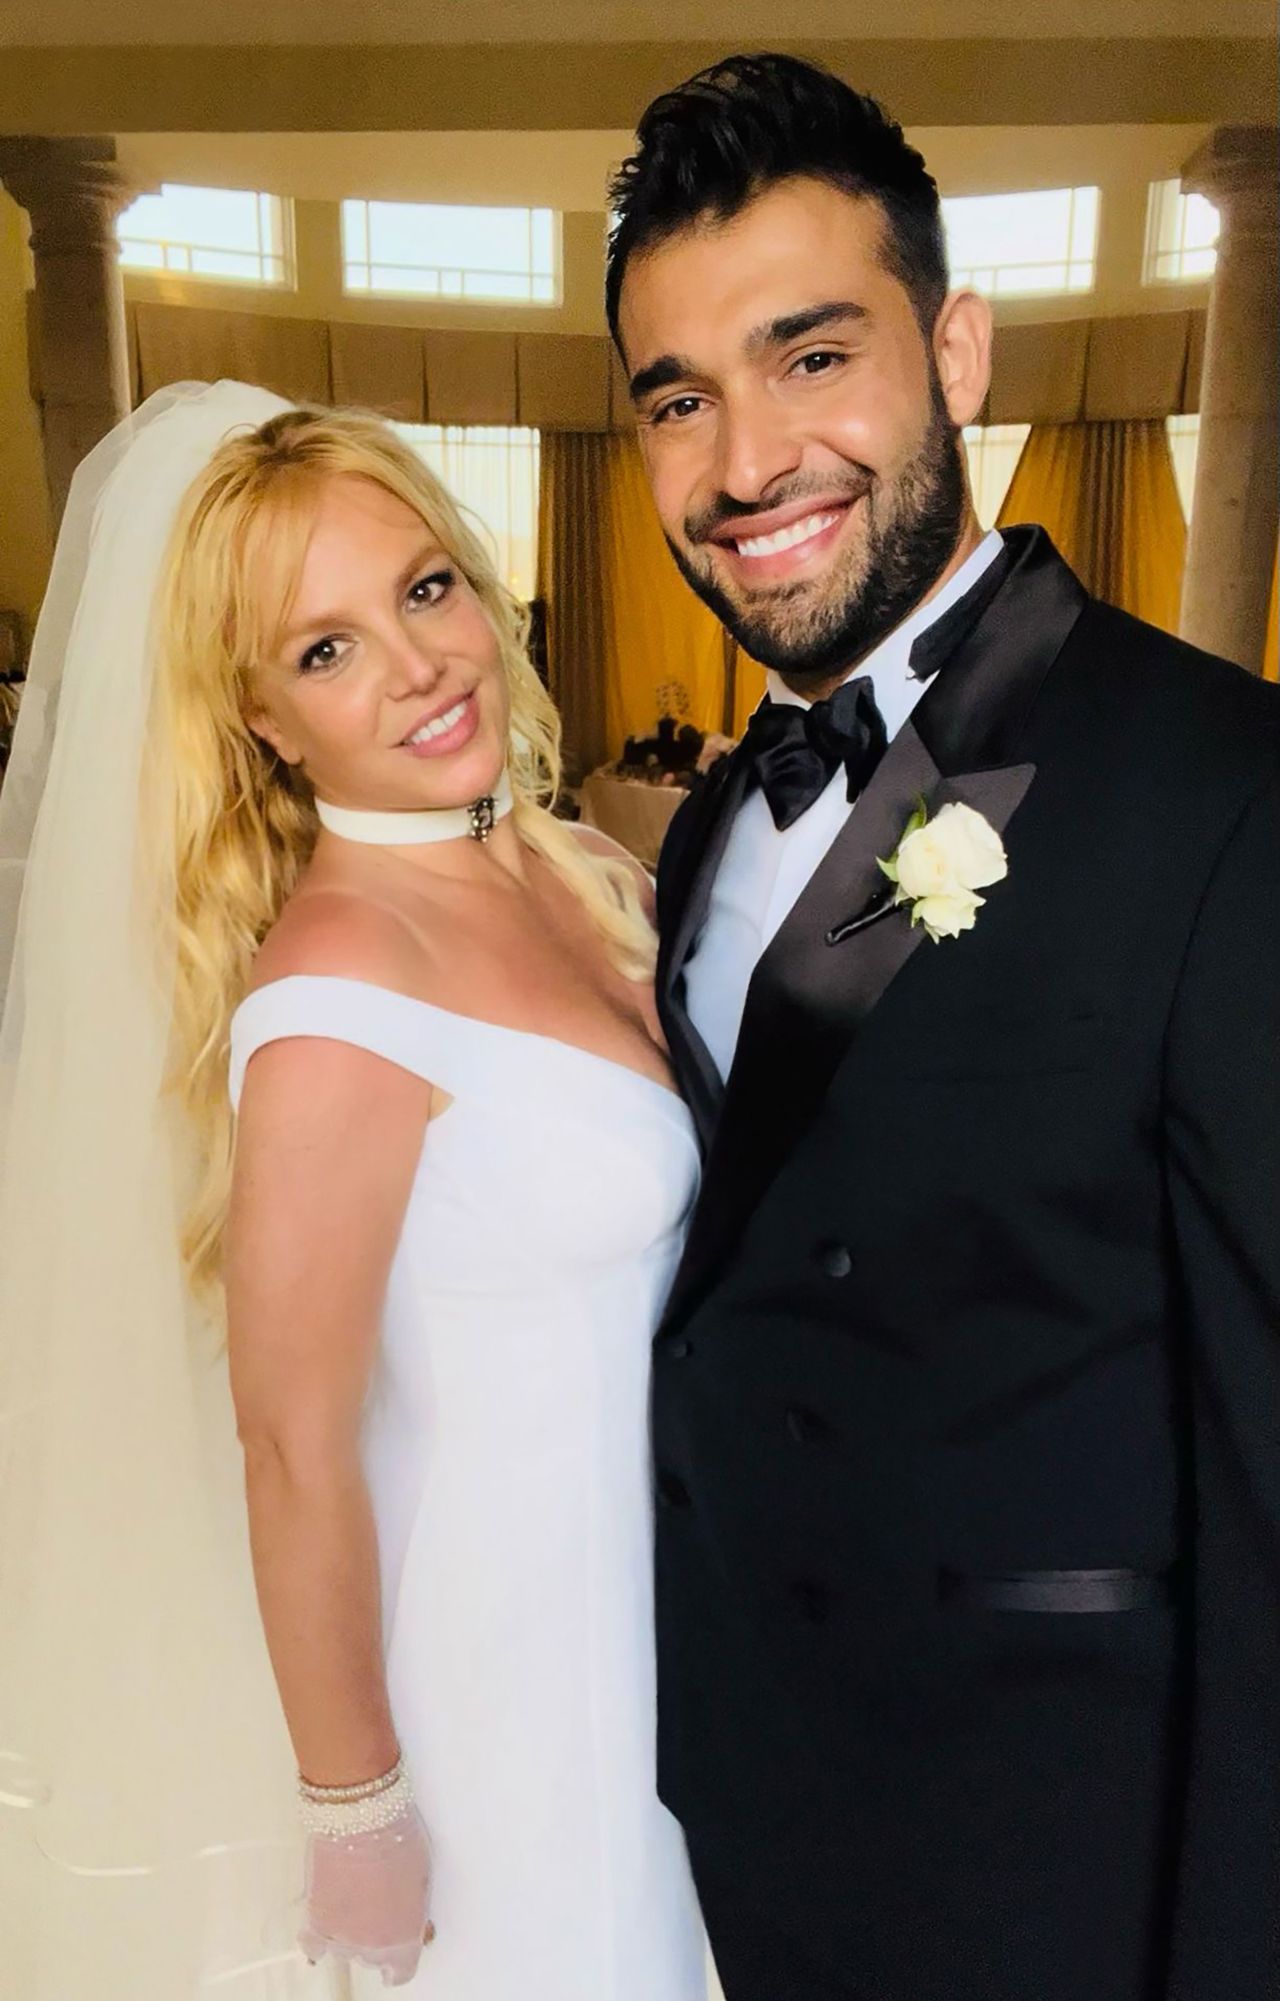 Spears <a href="https://www.cnn.com/2022/06/10/entertainment/britney-spears-wedding/index.html" target="_blank">married Sam Asghari,</a> a personal trainer turned actor, in June 2022. The pair first met in 2016 when Asghari co-starred with Spears in the video to her single, "Slumber Party."